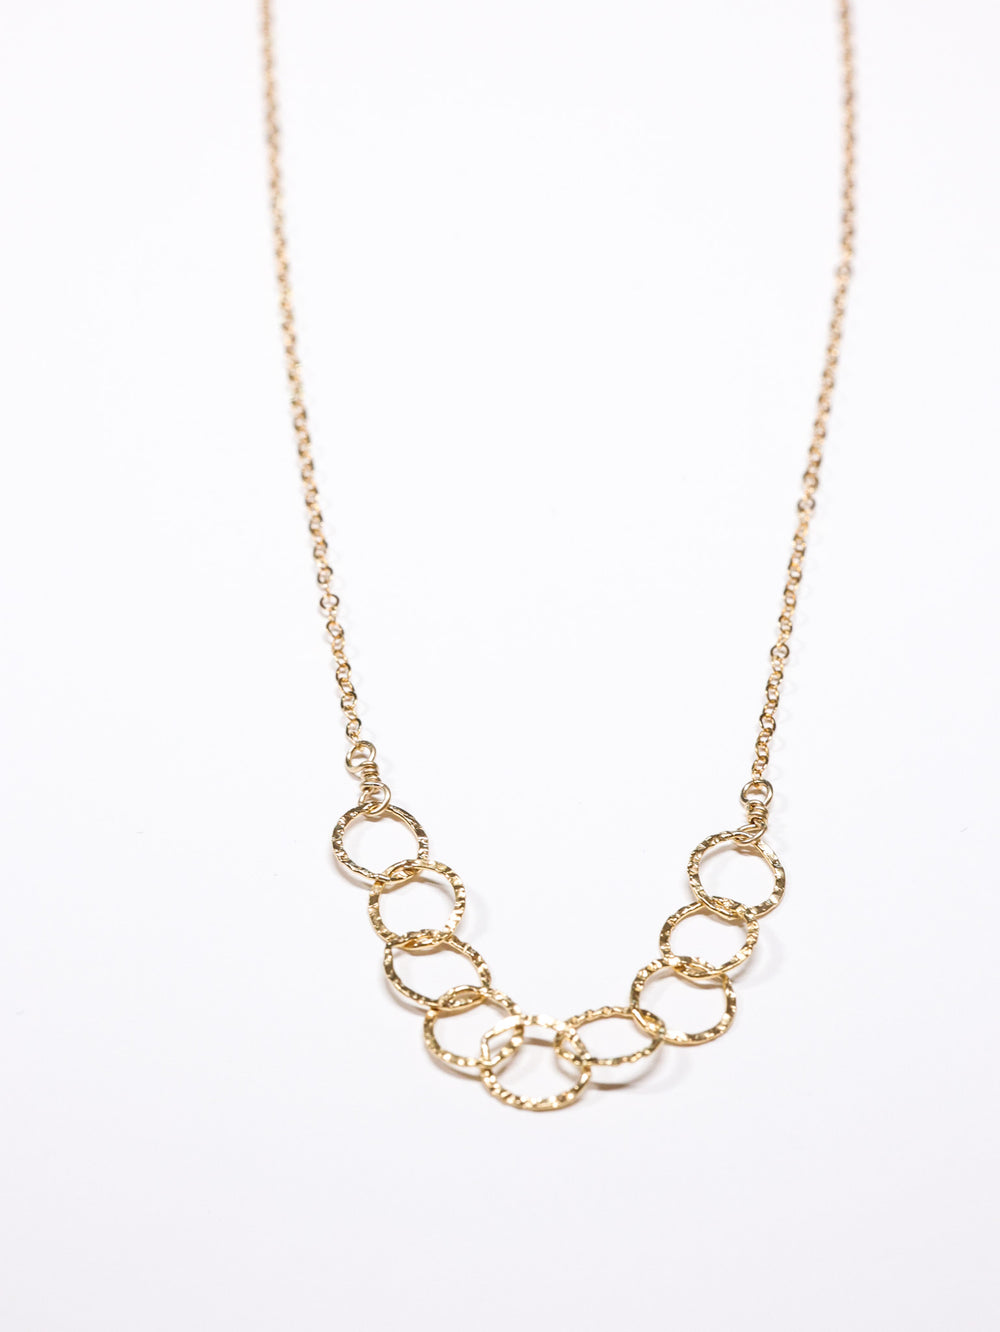 Smaller Circles Necklace -Gold Filled